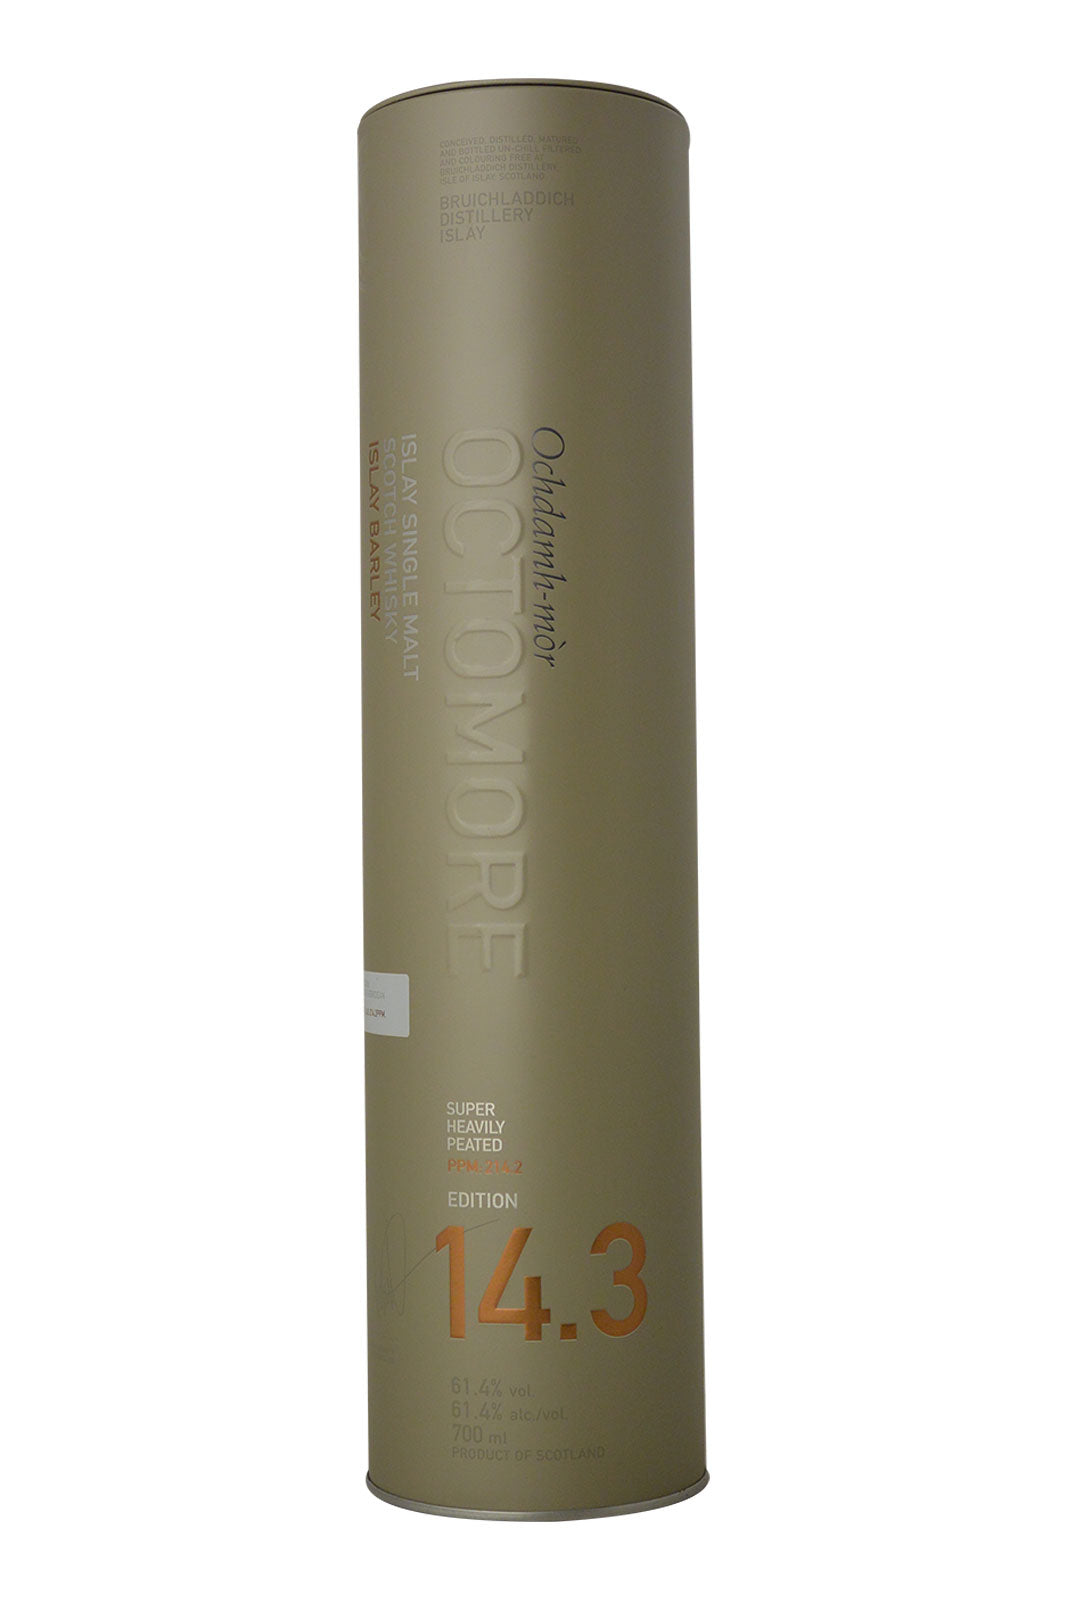 Octomore Edition 14.3 5 Year Old Islay Barley - 214.2 PPM